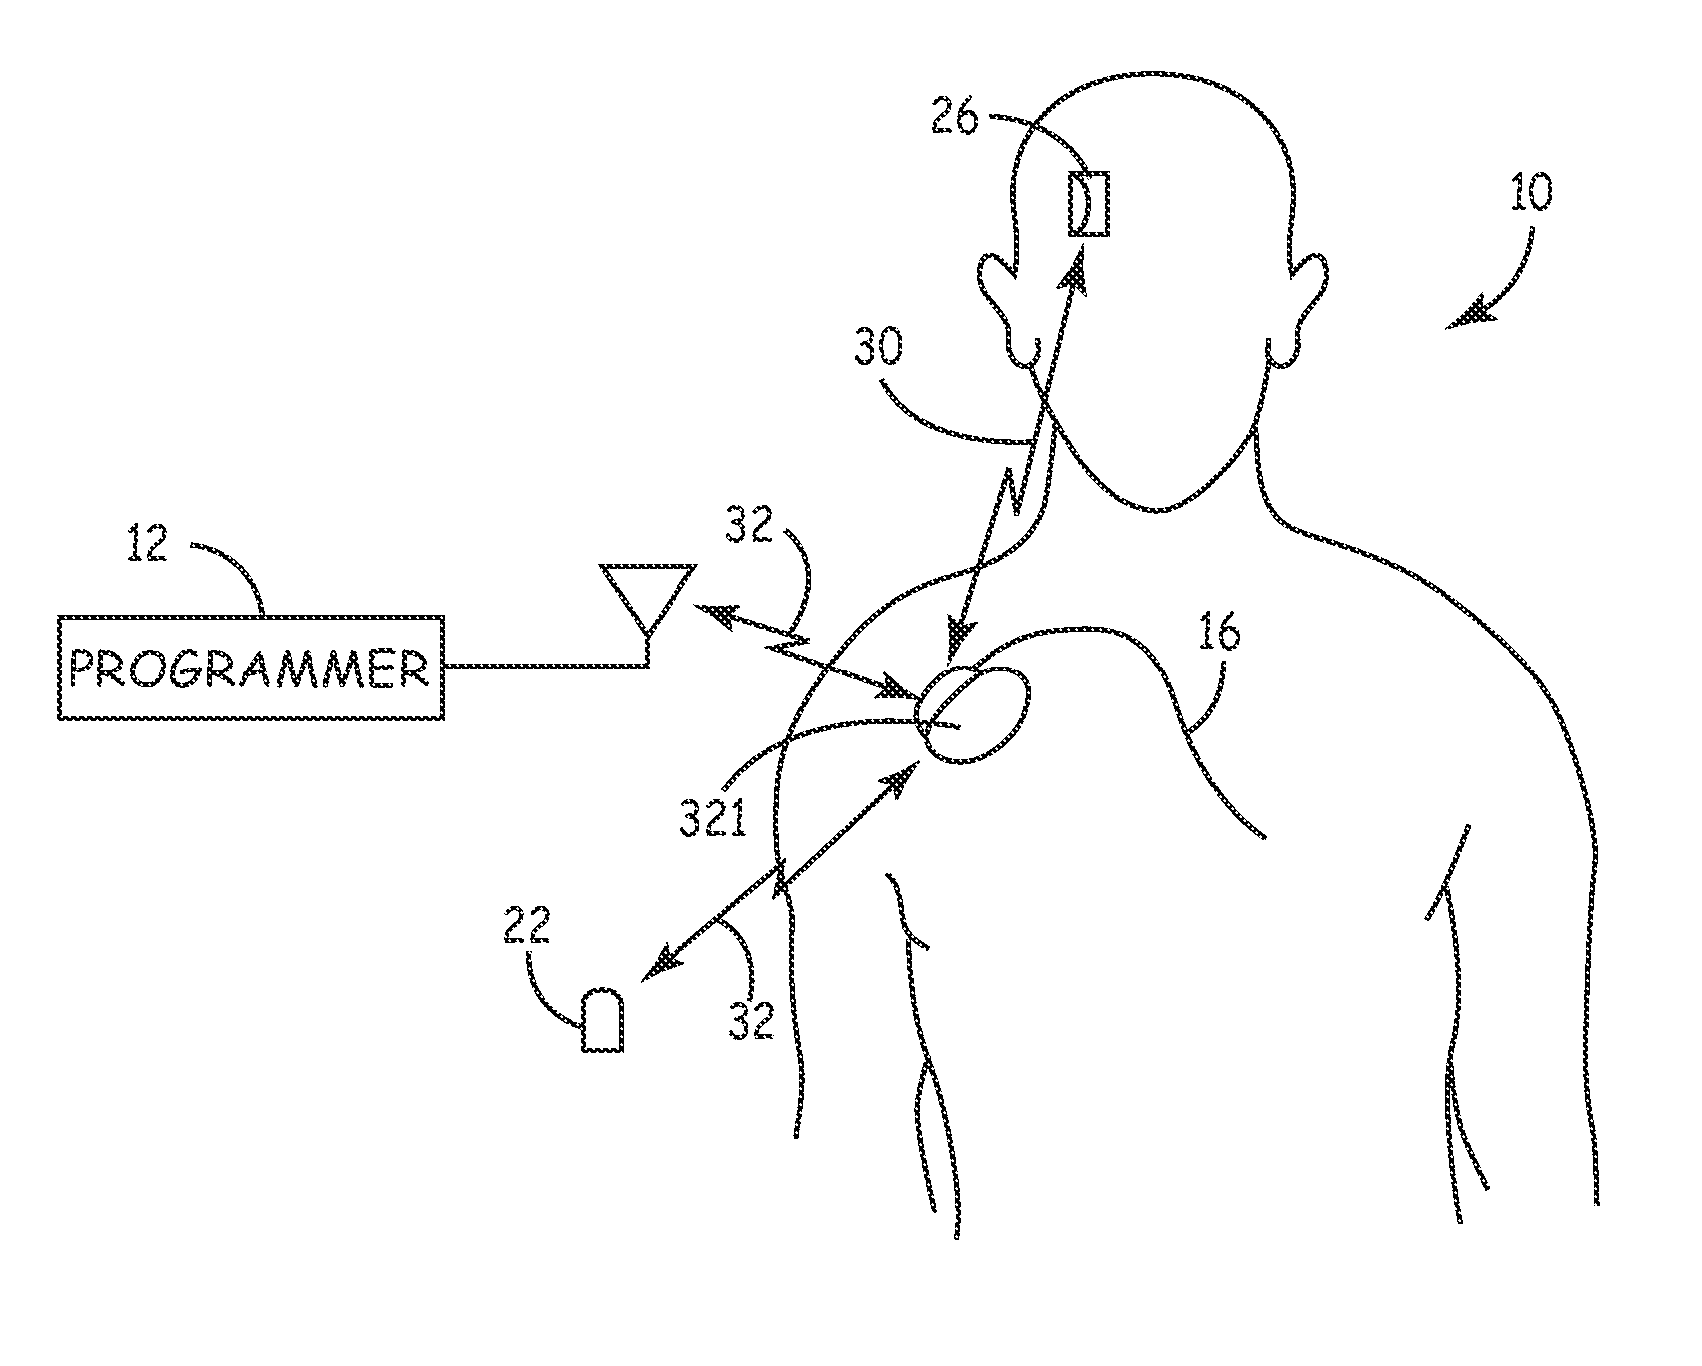 System and method for regulating cardiopulmonary triggered therapy to the brain